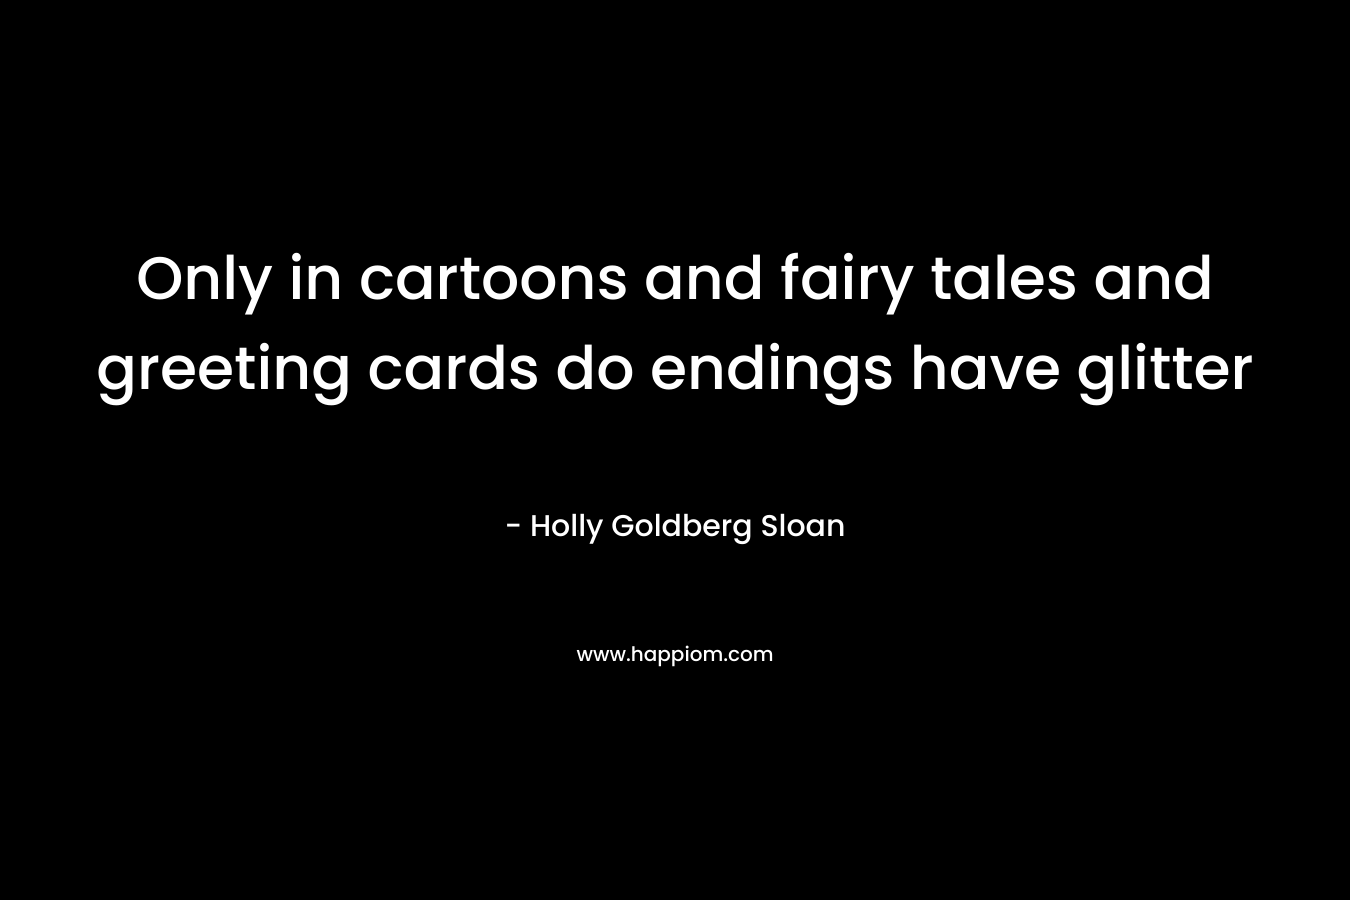 Only in cartoons and fairy tales and greeting cards do endings have glitter – Holly Goldberg Sloan